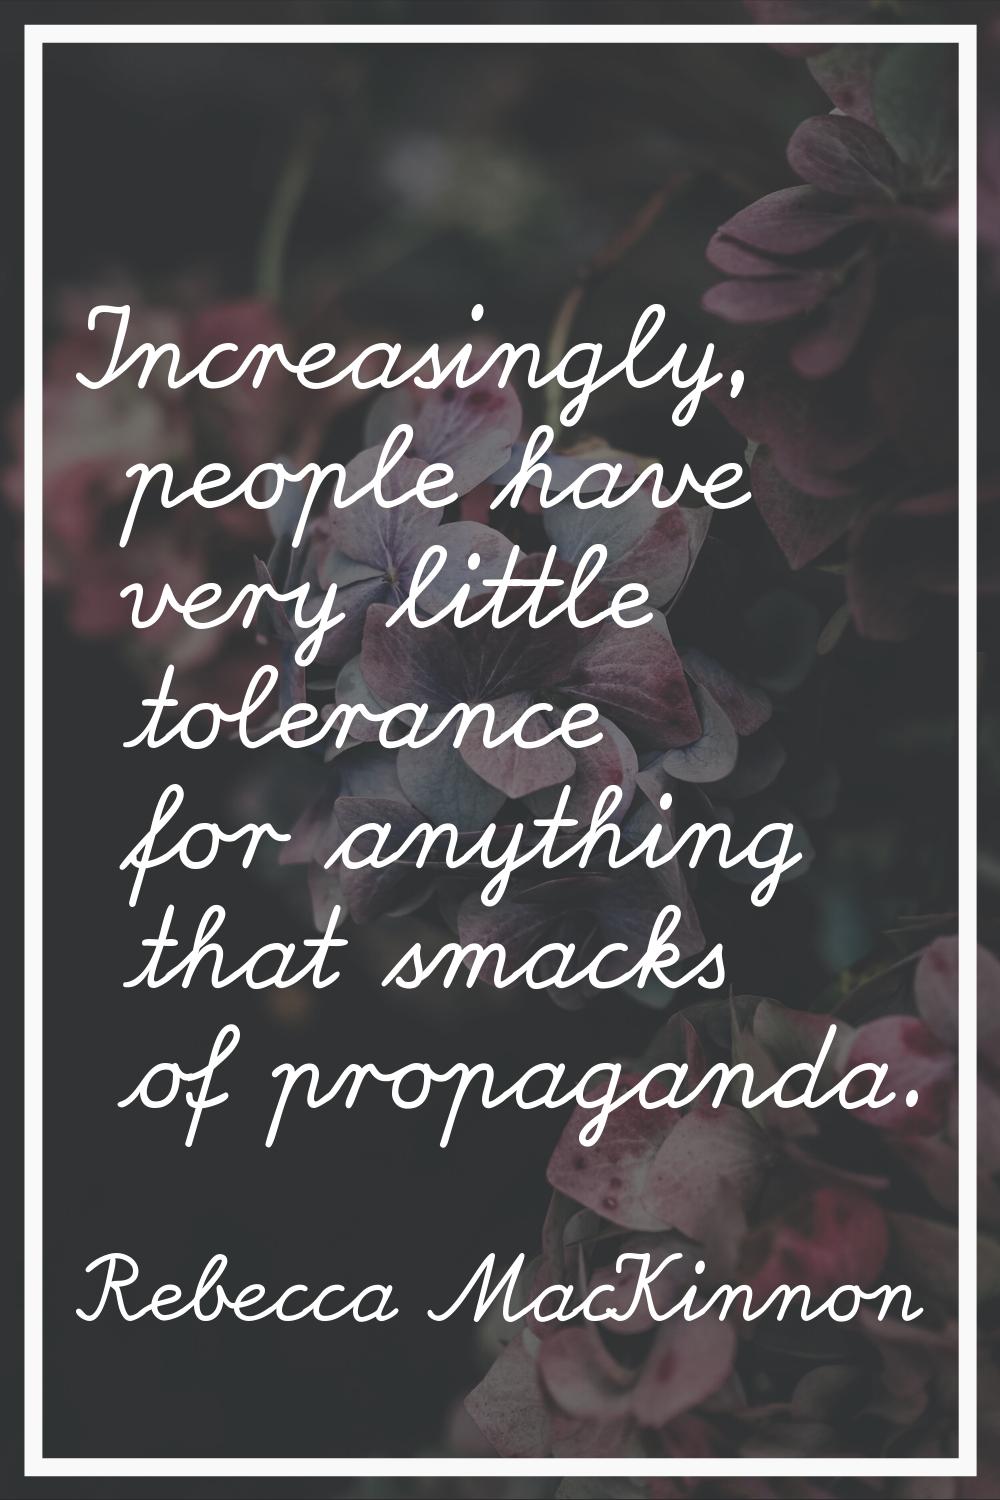 Increasingly, people have very little tolerance for anything that smacks of propaganda.